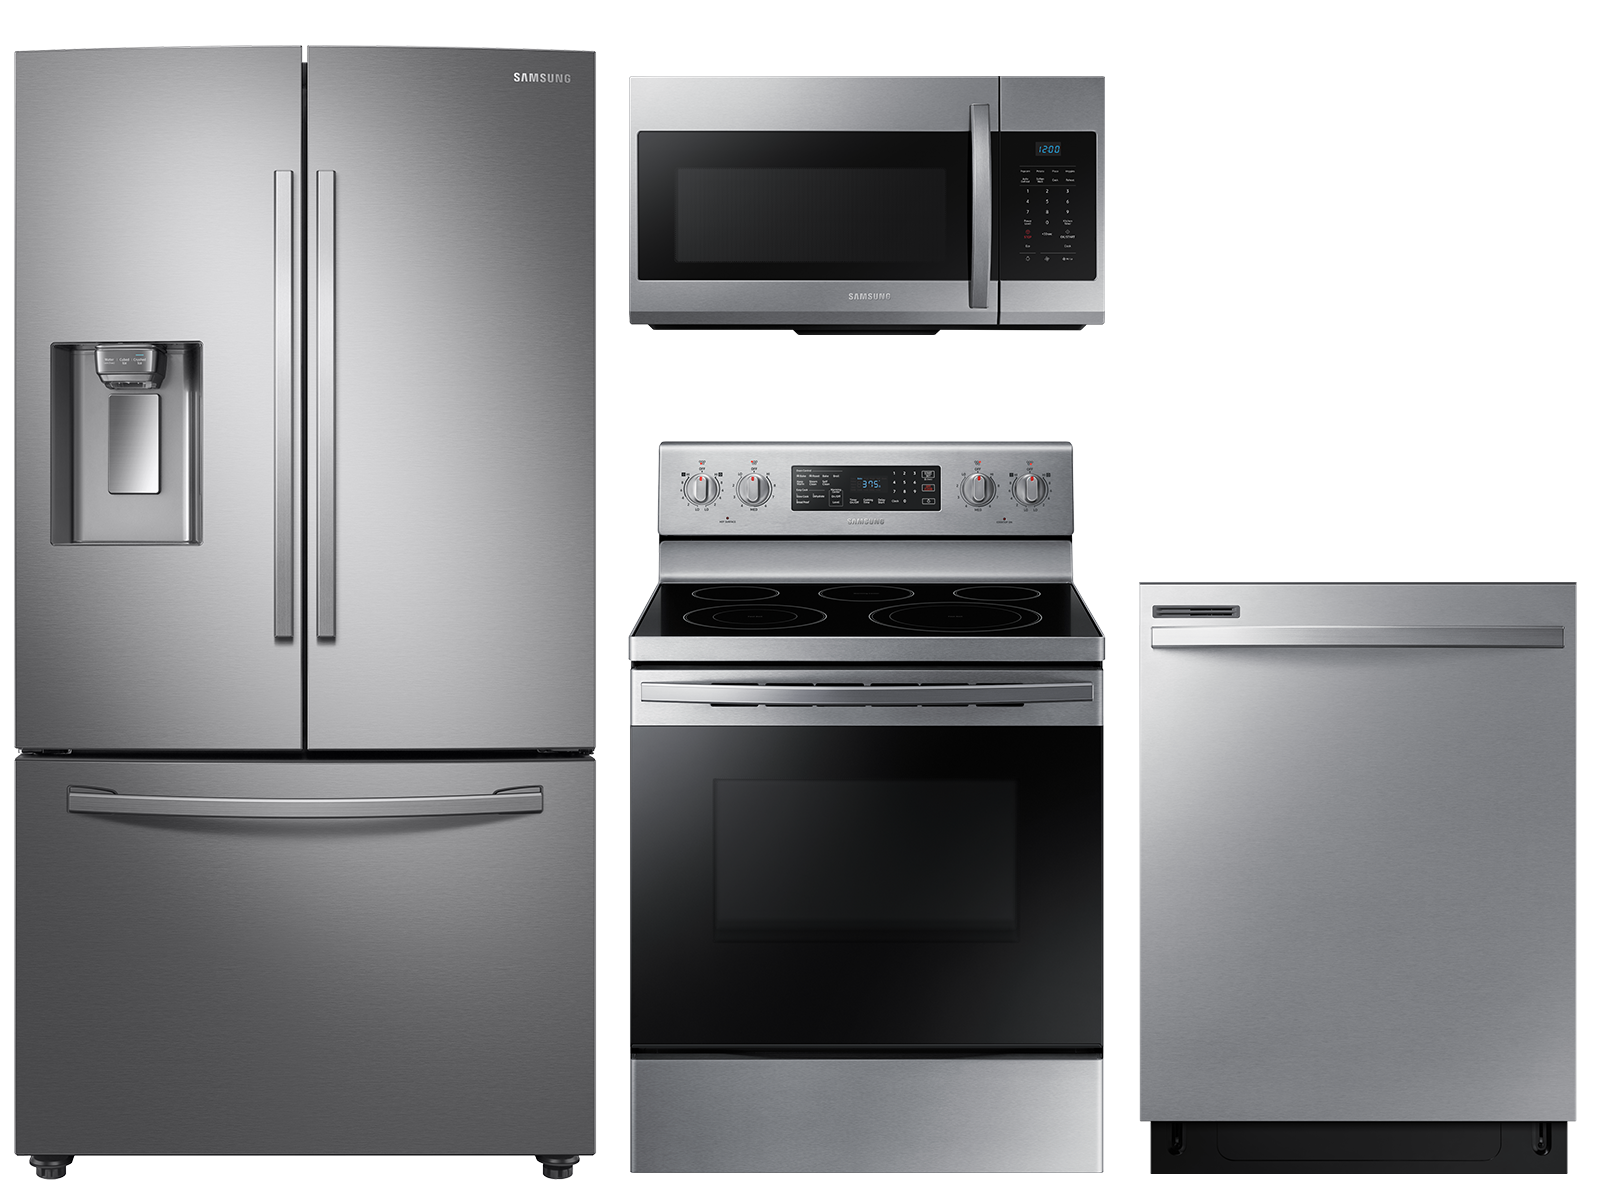 Large Capacity 3-door Refrigerator + Electric Range with Convection + 55 dBA Dishwasher + Microwave in Stainless Steel